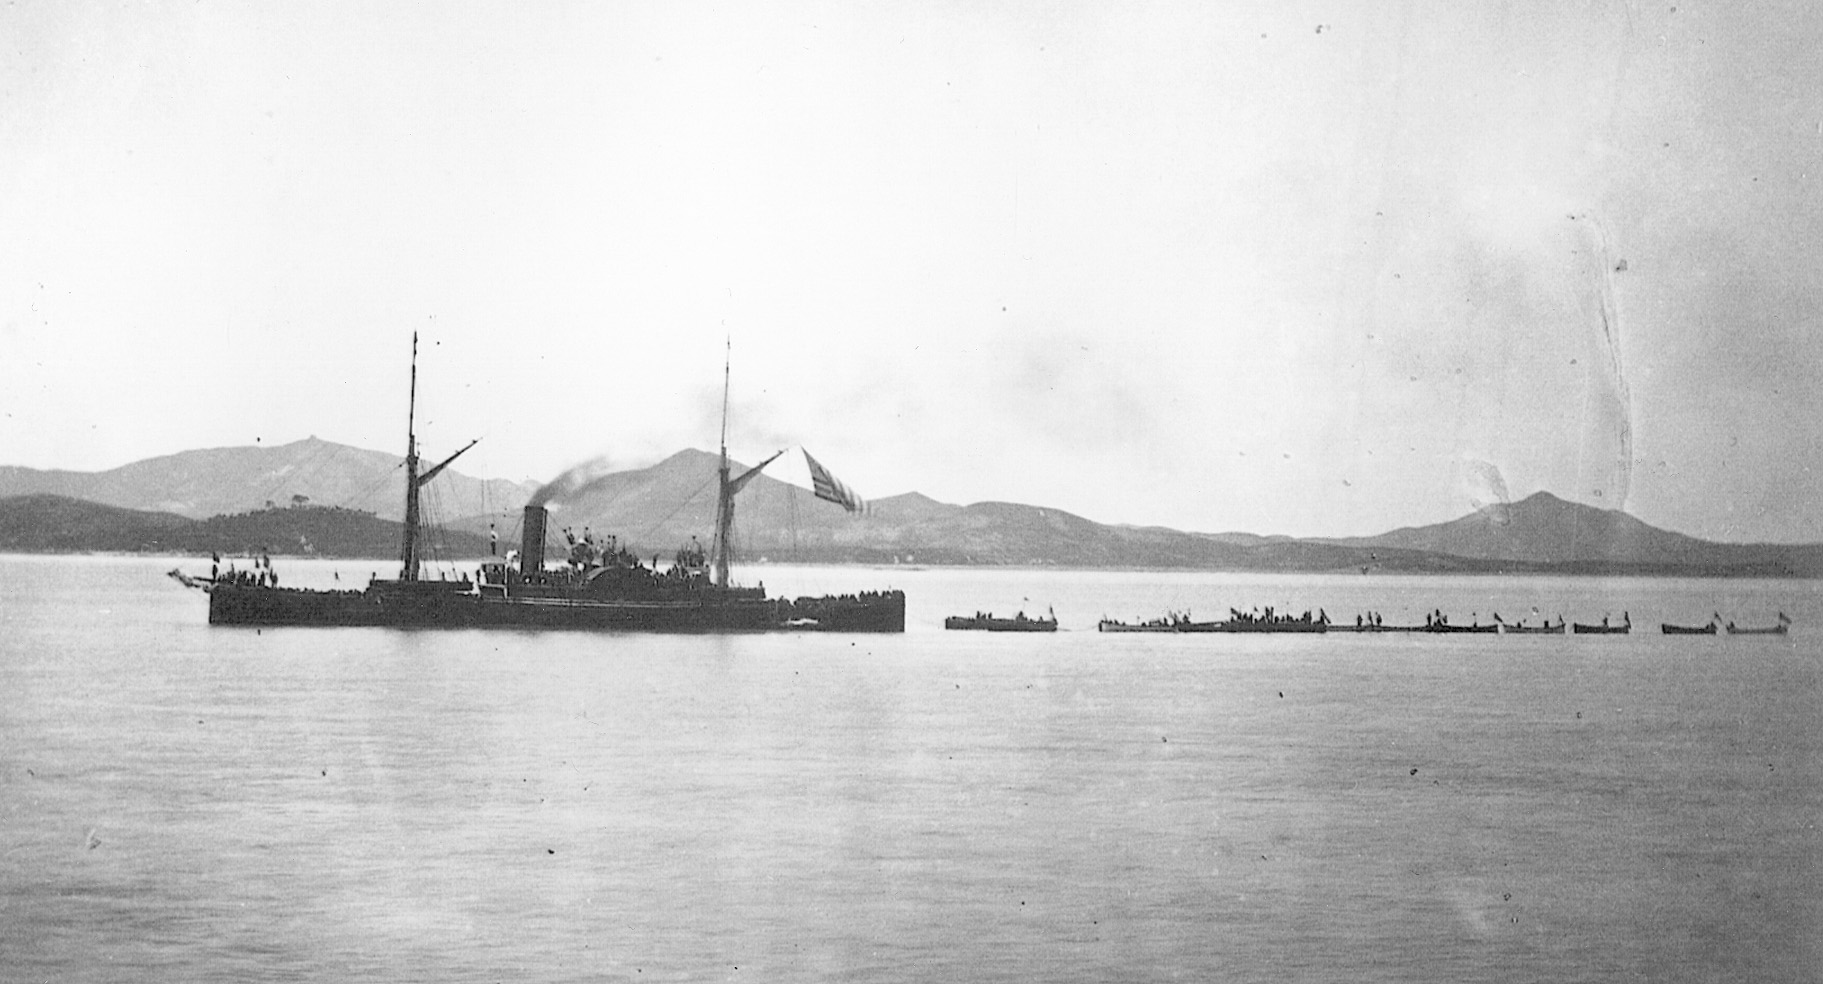 The sidewheeler USS Monocay tows landing force boats.